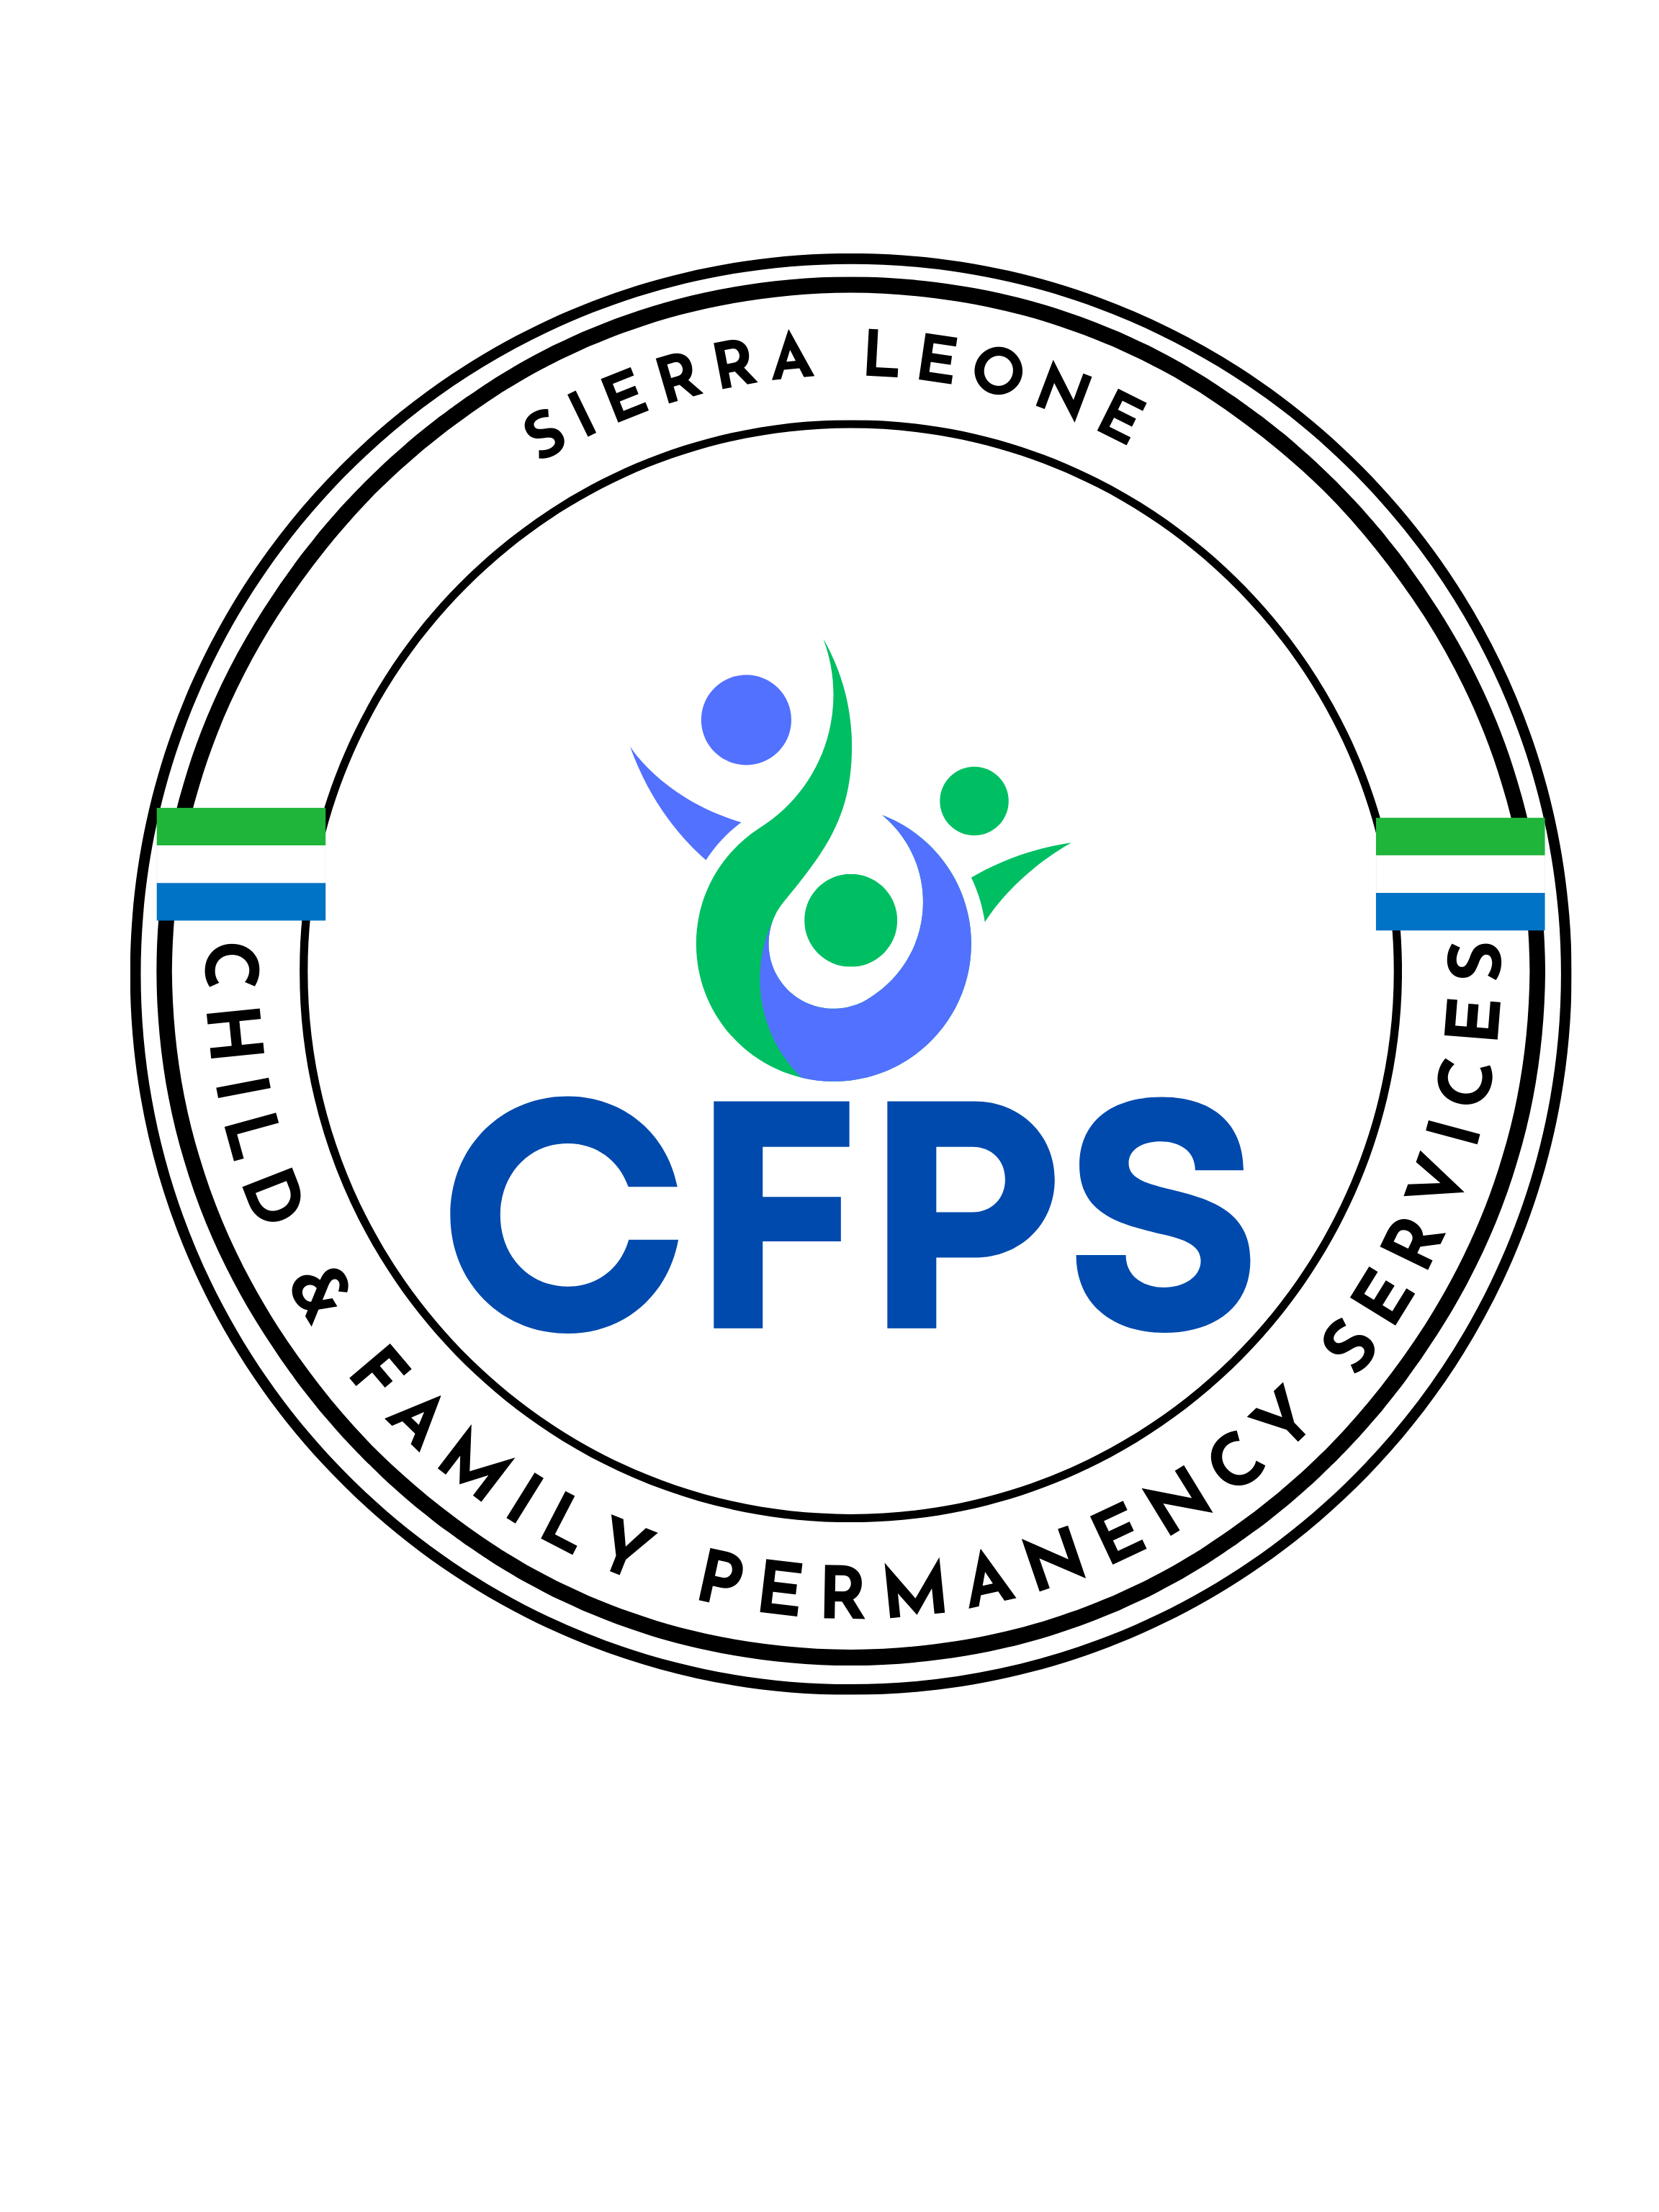 Child and Family Permanency Services Sierra Leone